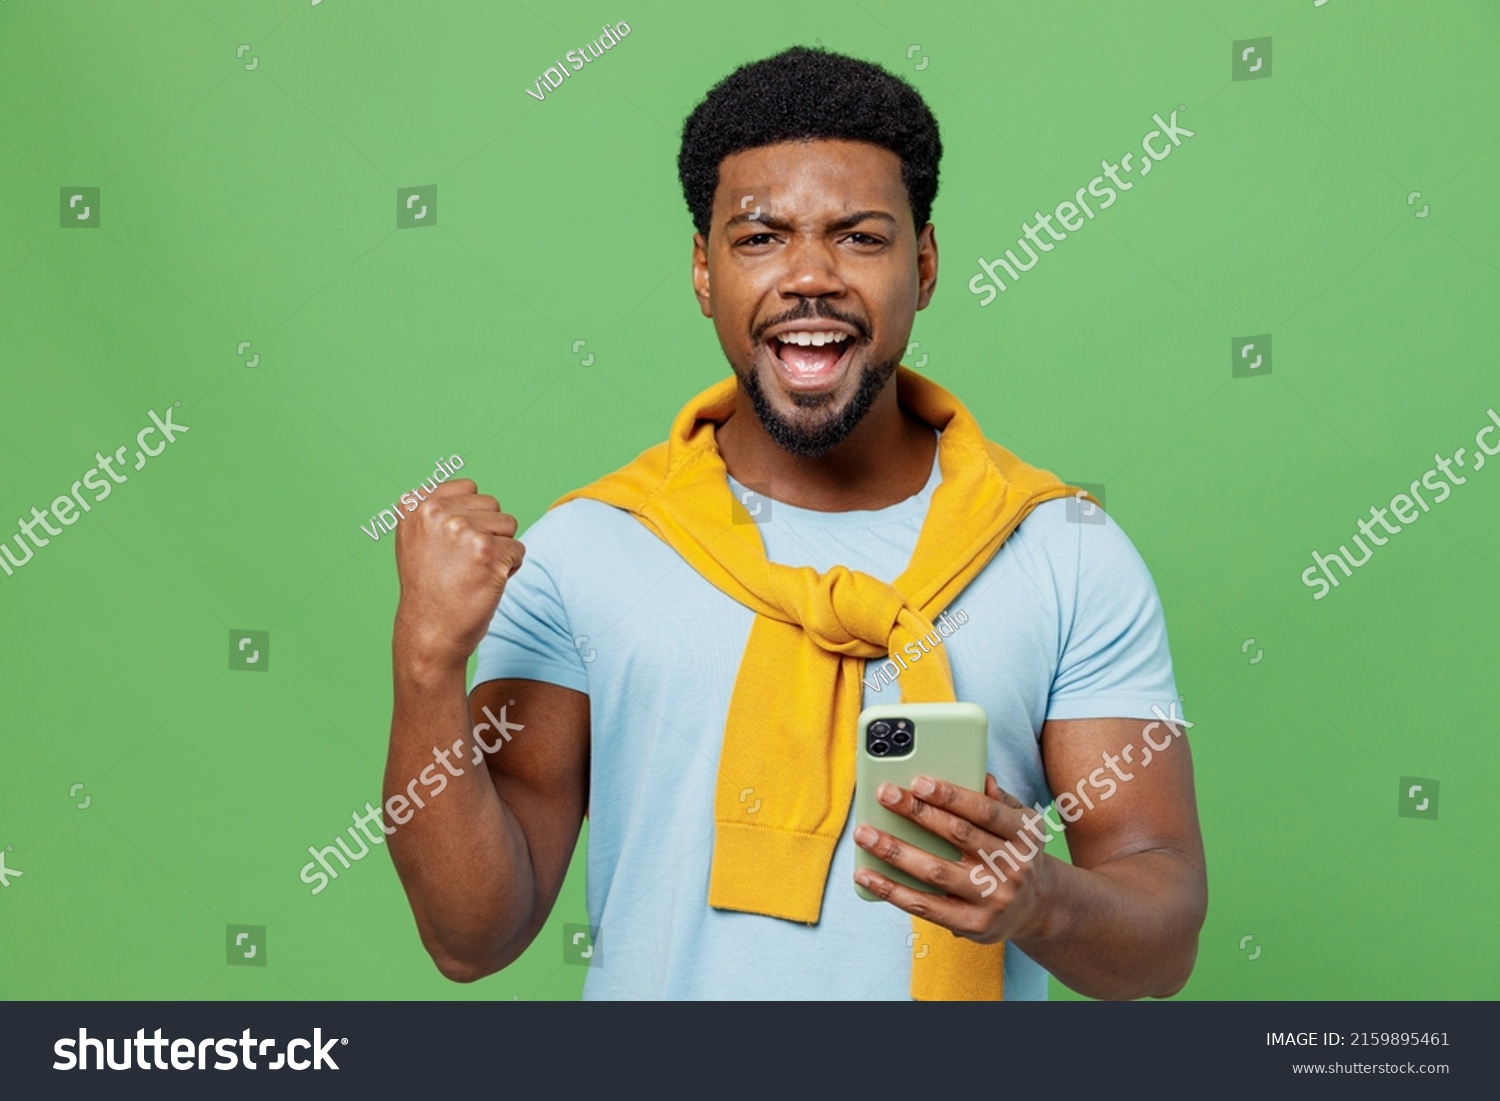 Young excited man of African American ethnicity 20s wear blue t-shirt hold in hand use mobile cell phone do winner gesture isolated on plain green background studio portrait. People lifestyle concept #2159895461